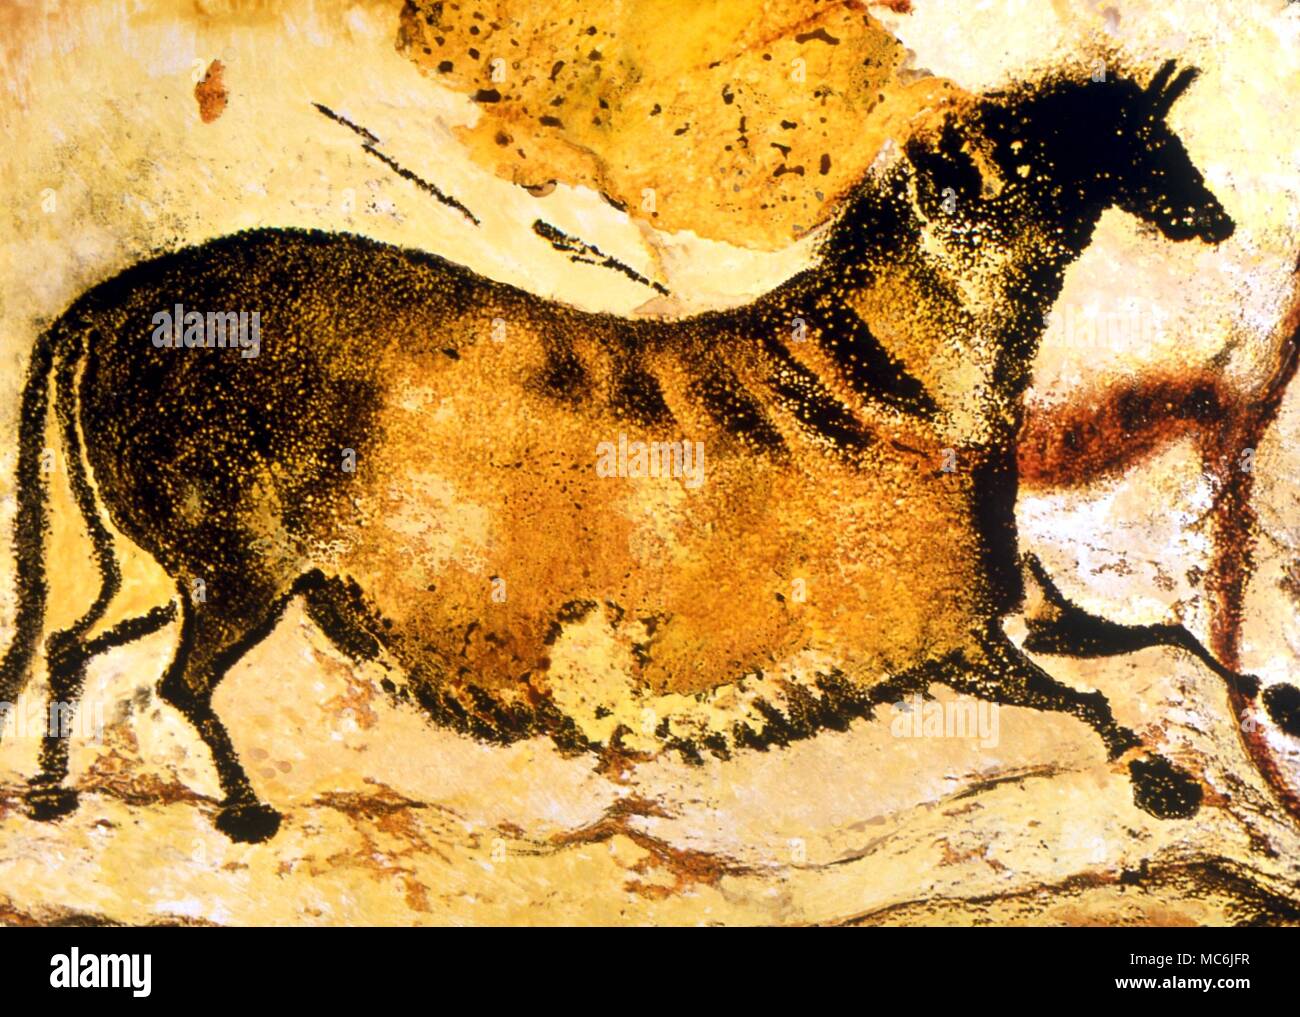 CAVE PAINTINGS AND DRAWINGS. Prehistoric cave painting of Horse from Lascaux (Axial Gallery). Artwork and computer graphic by James Thorn. Copyright CWC Stock Photo